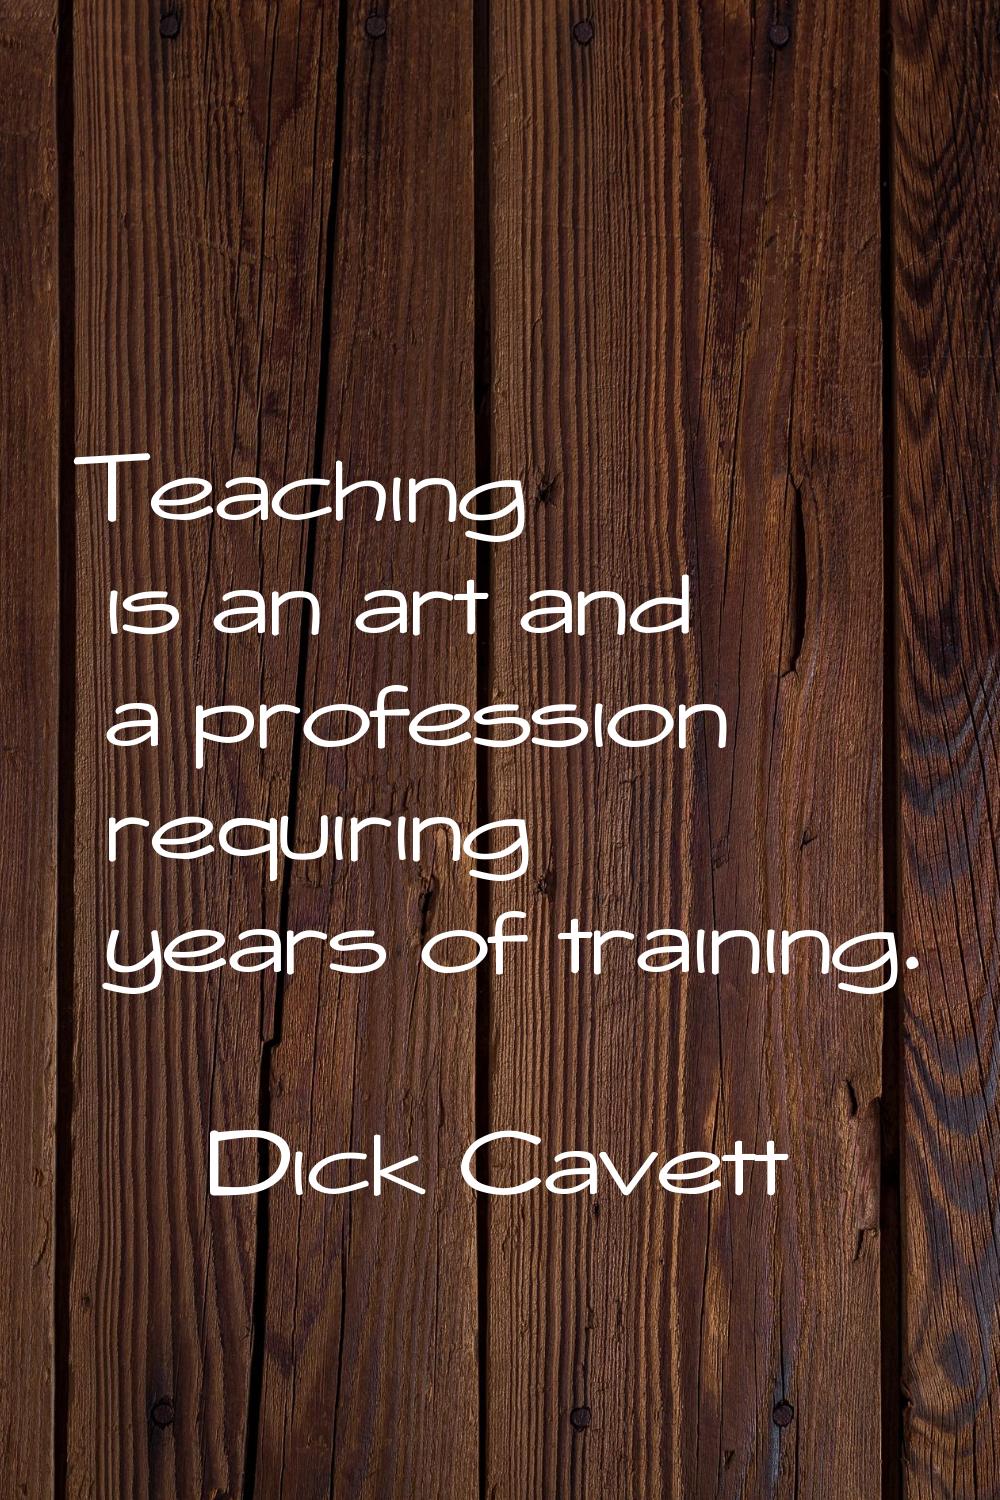 Teaching is an art and a profession requiring years of training.